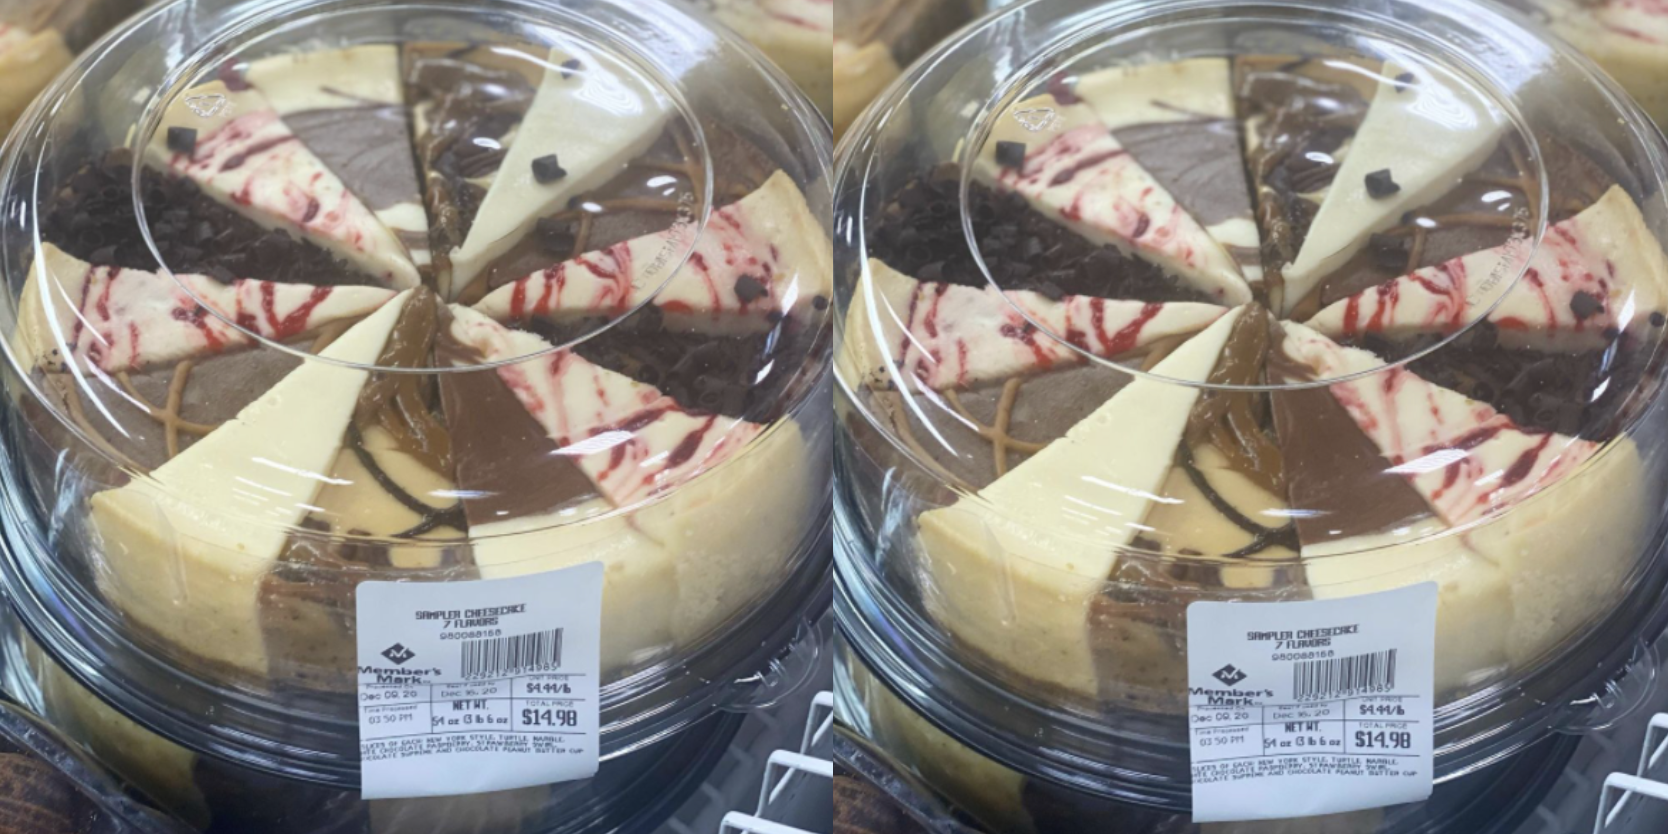 Sam's Club Is Selling A Cheesecake Sampler With 7 Flavors